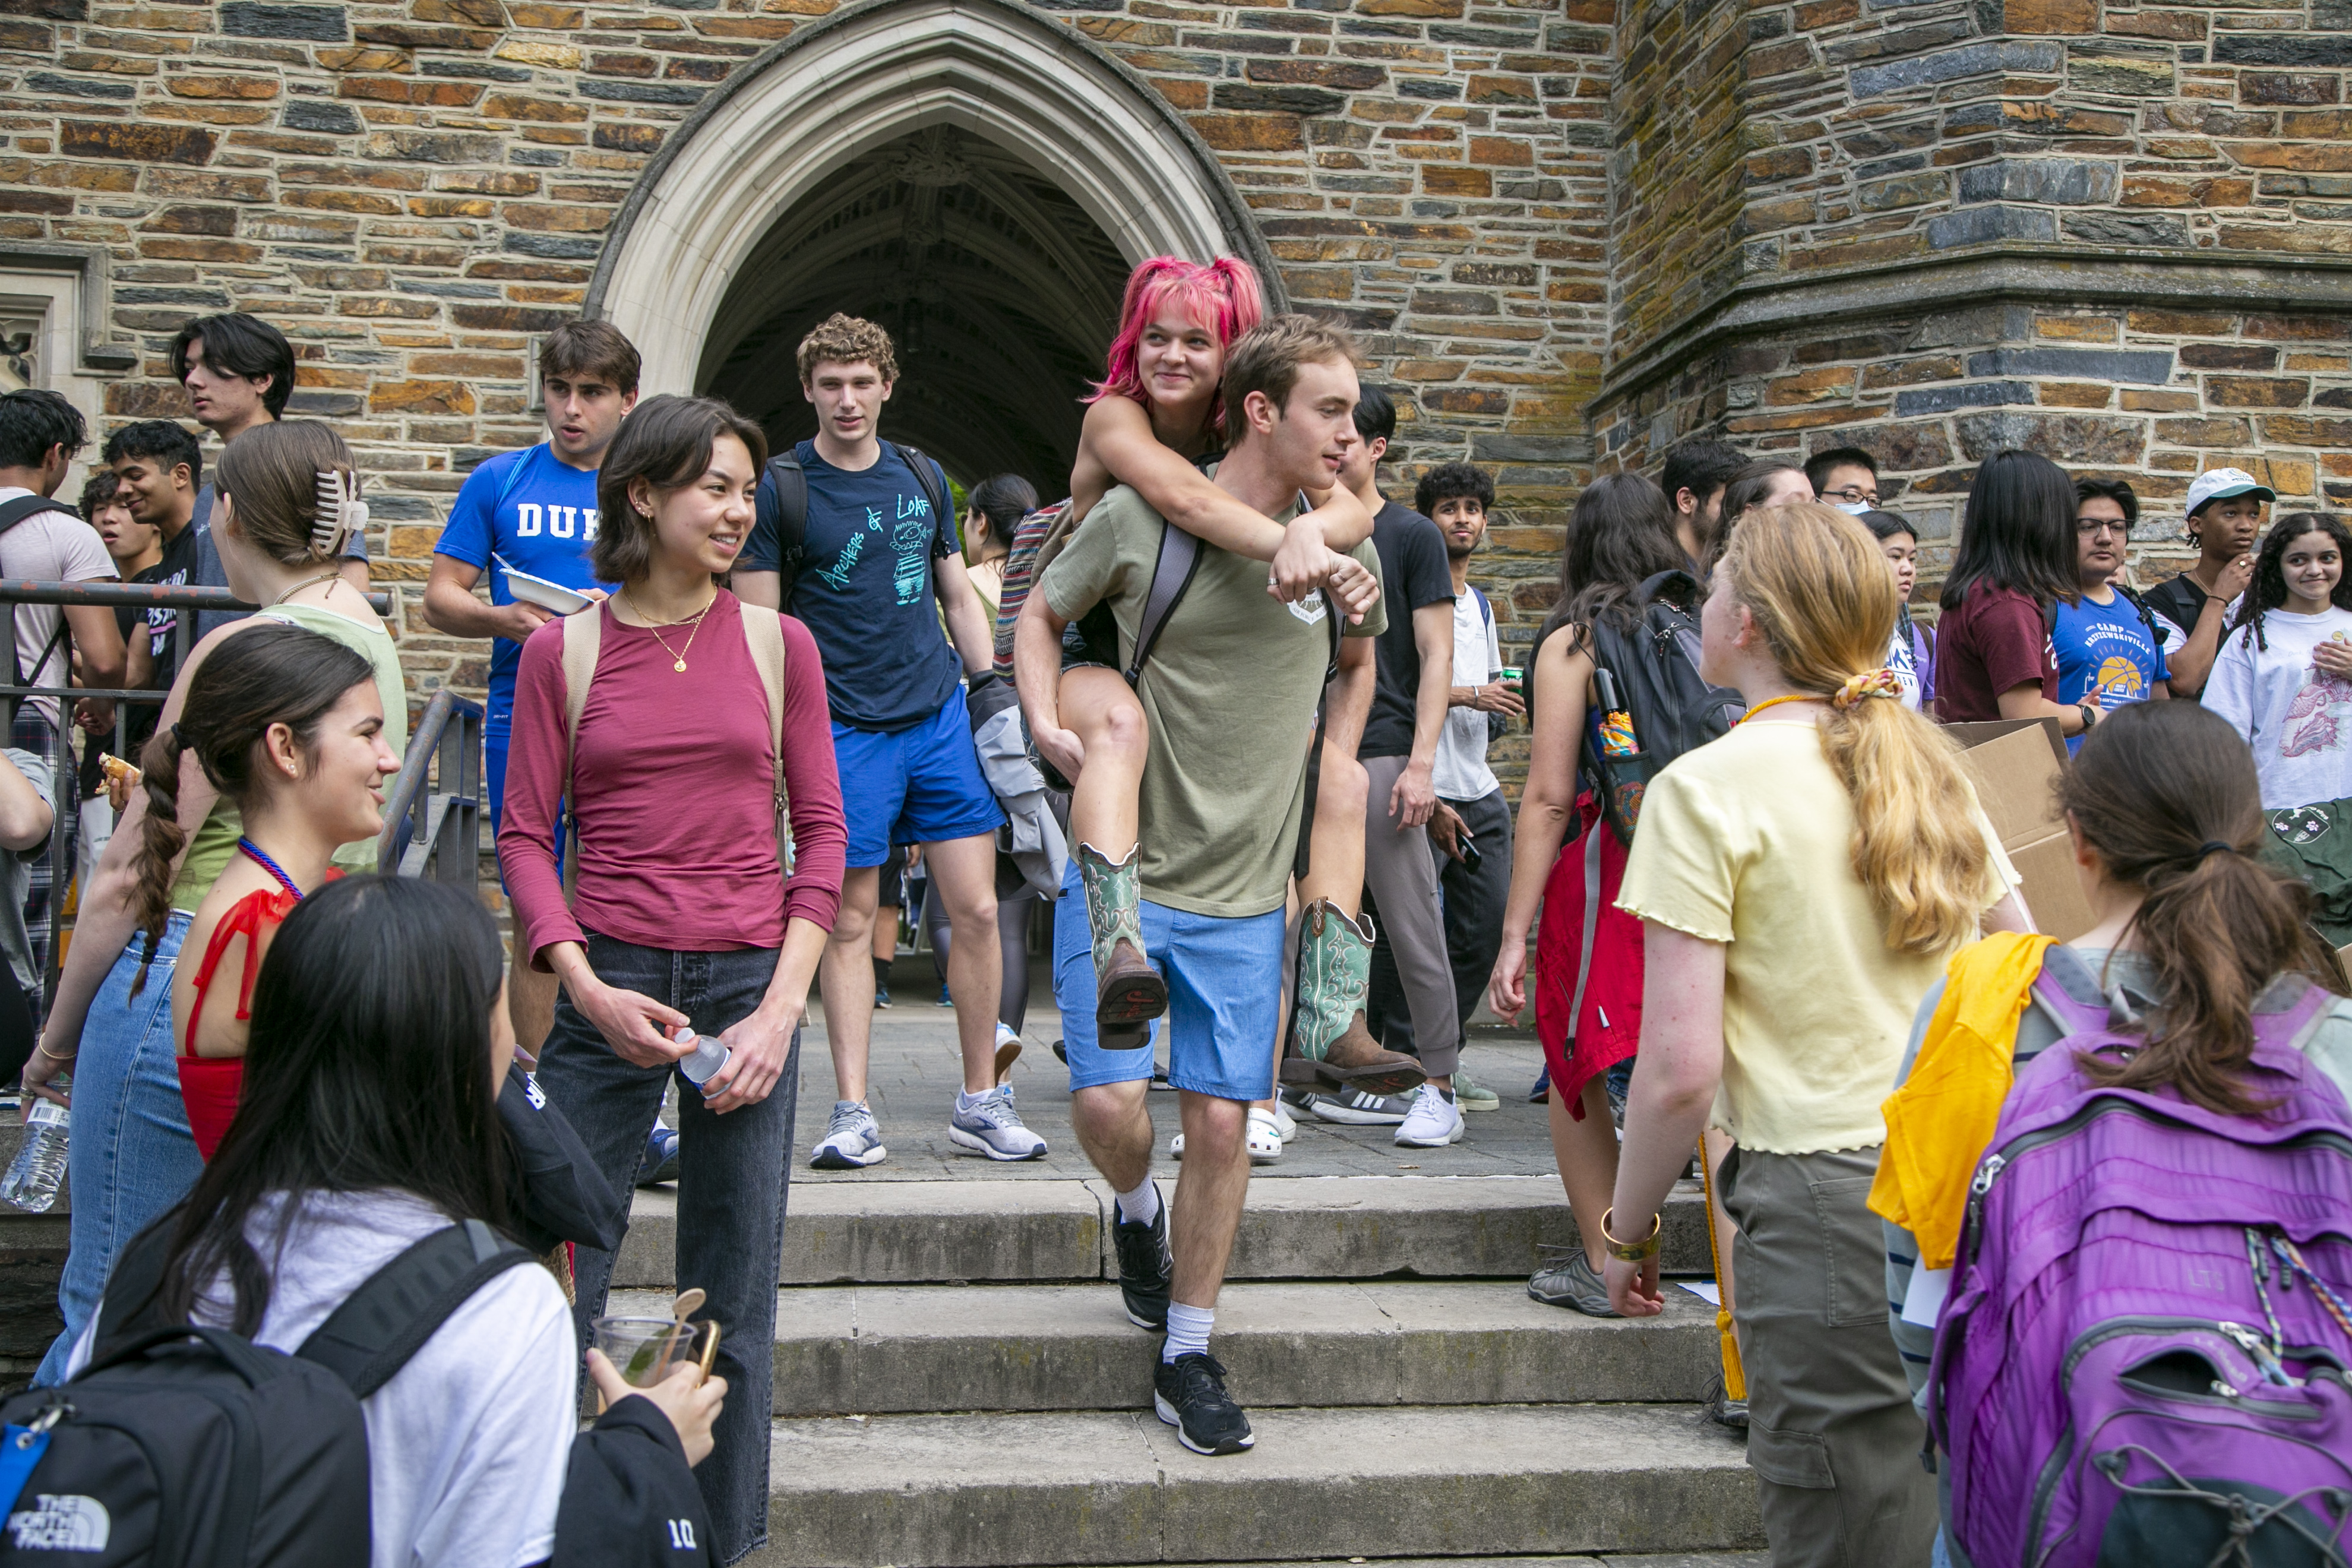 Students gather around and enter under the Kilgo Quad stone arch. In the center a student with bright red hair smiles, riding piggyback on a peer.